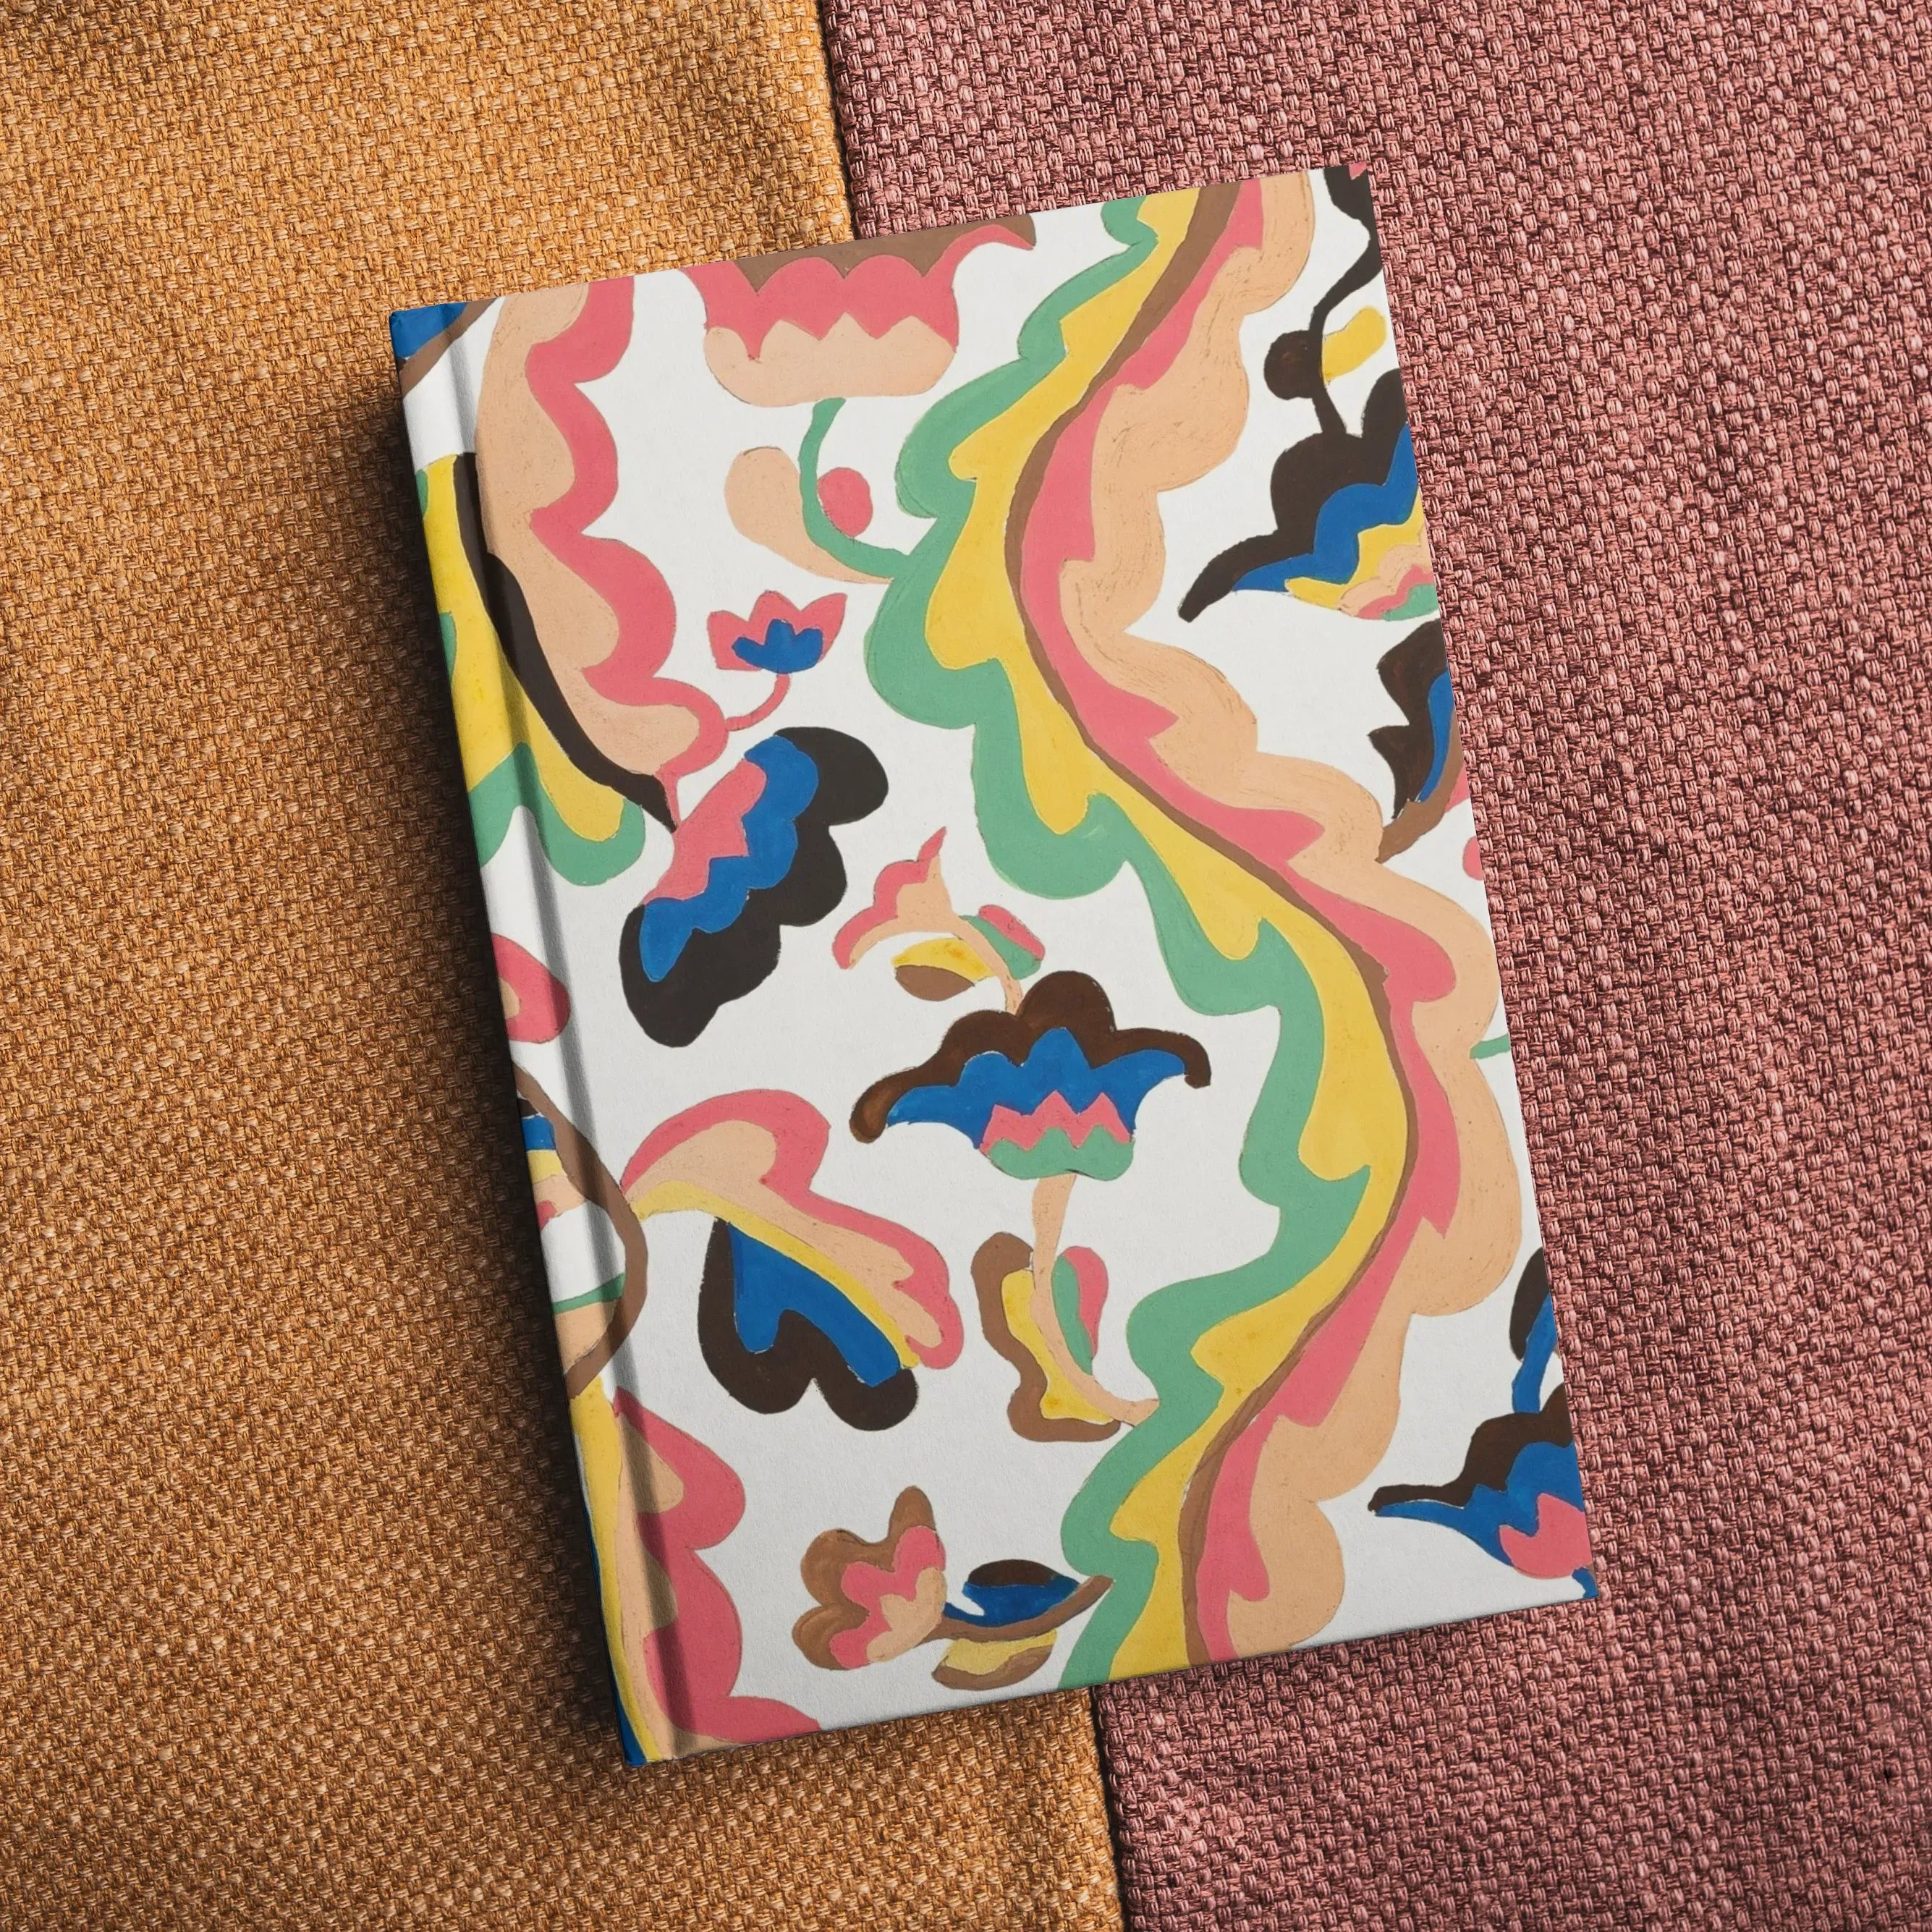 Colcha By Etna Wiswall Hardback Journal - Notebooks & Notepads - Aesthetic Art